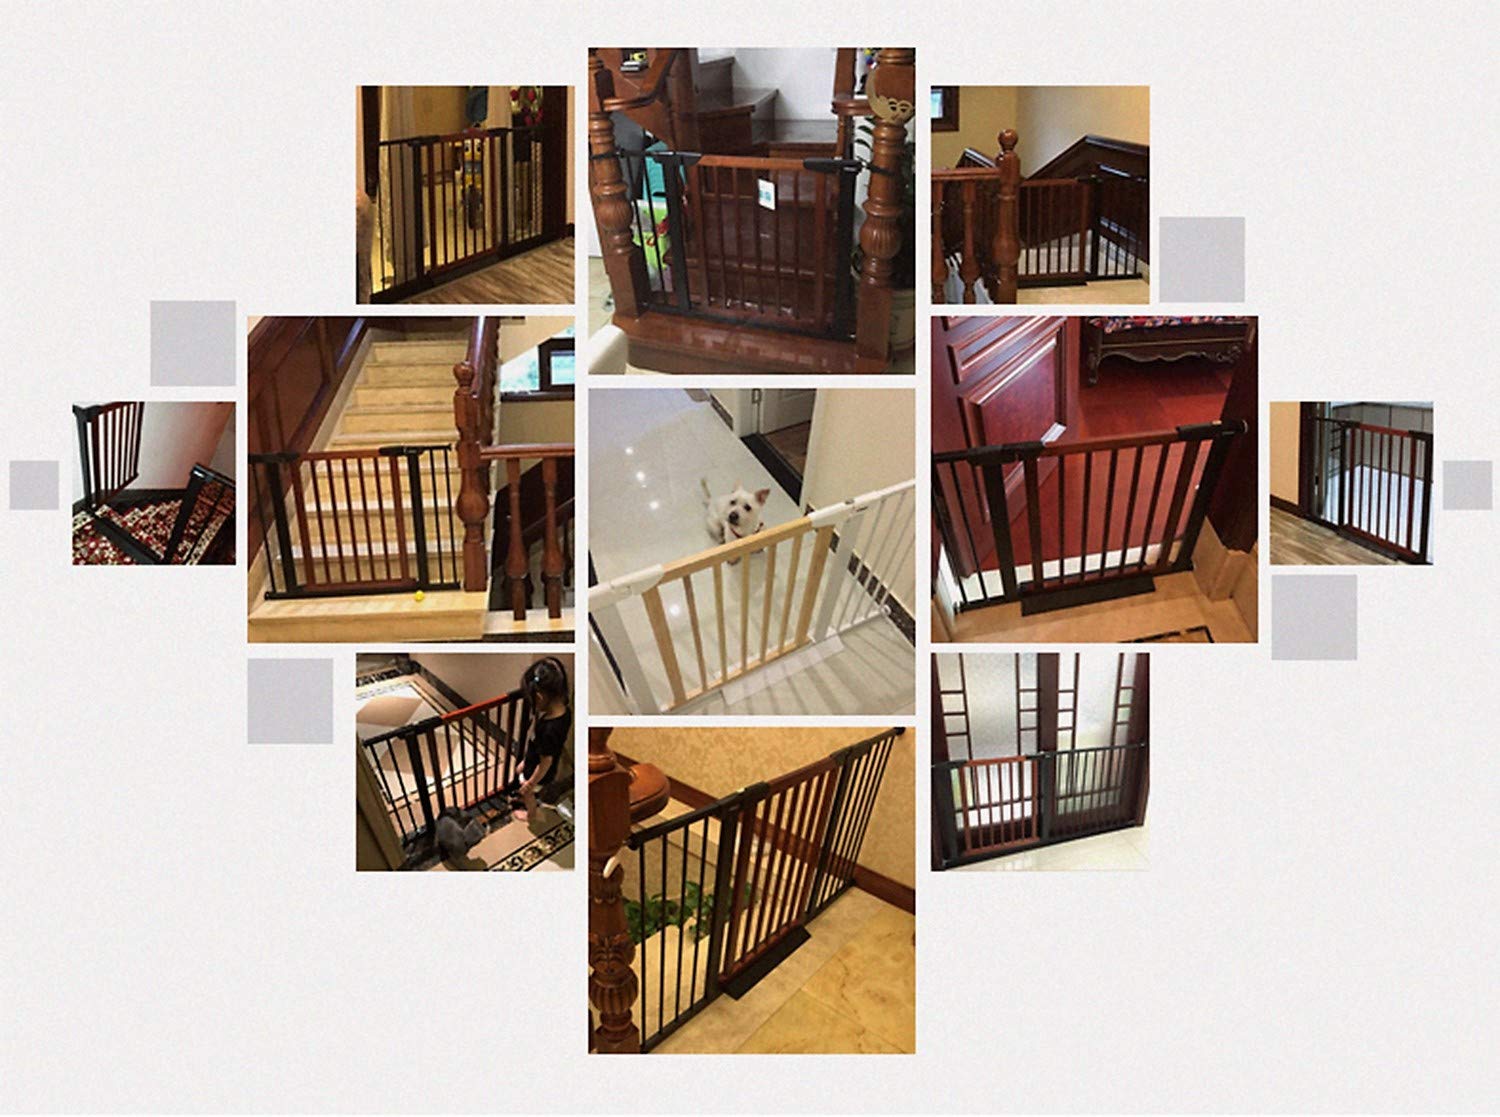 Baby Gate/Baby Gate for Stair with Banisters/Pet Gate, Fit Stairway or Doorway, Extendable, Auto Close, Pressure Mount (Metal)